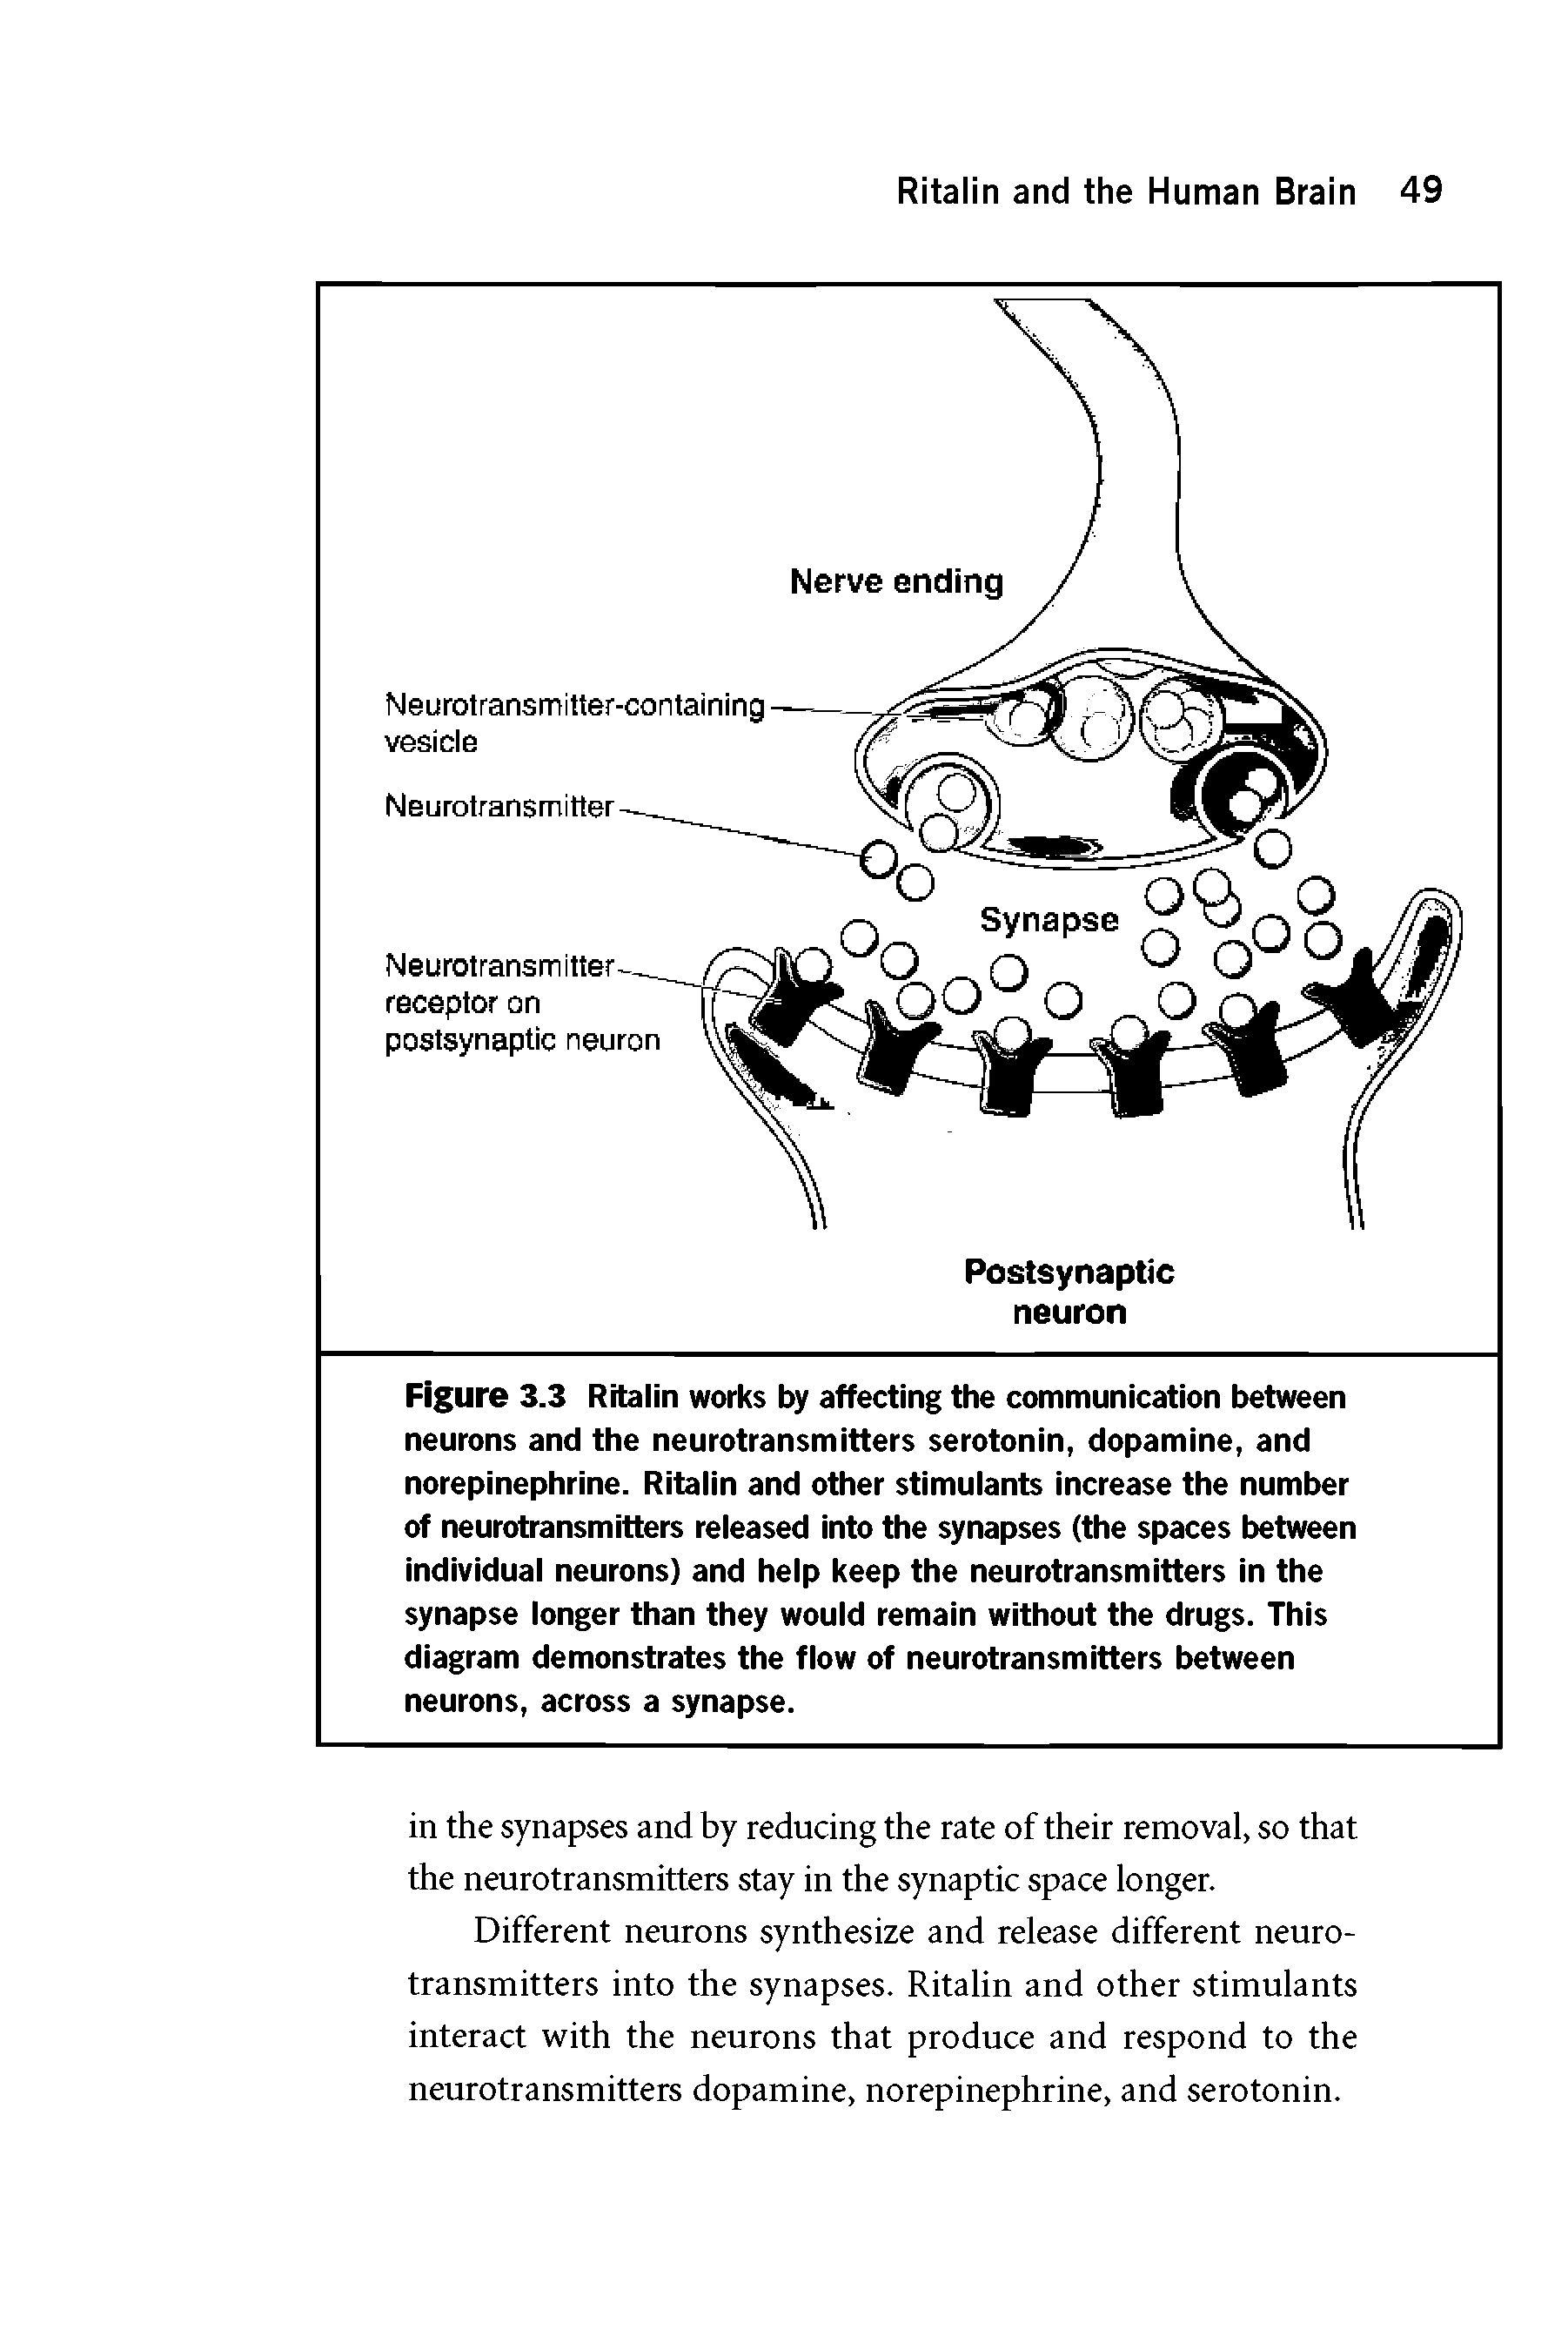 Figure 3.3 Ritalin works by affecting the communication between neurons and the neurotransmitters serotonin, dopamine, and norepinephrine. Ritalin and other stimulants increase the number of neurotransmitters released into the synapses (the spaces between individual neurons) and help keep the neurotransmitters in the synapse longer than they would remain without the drugs. This diagram demonstrates the flow of neurotransmitters between neurons, across a synapse.